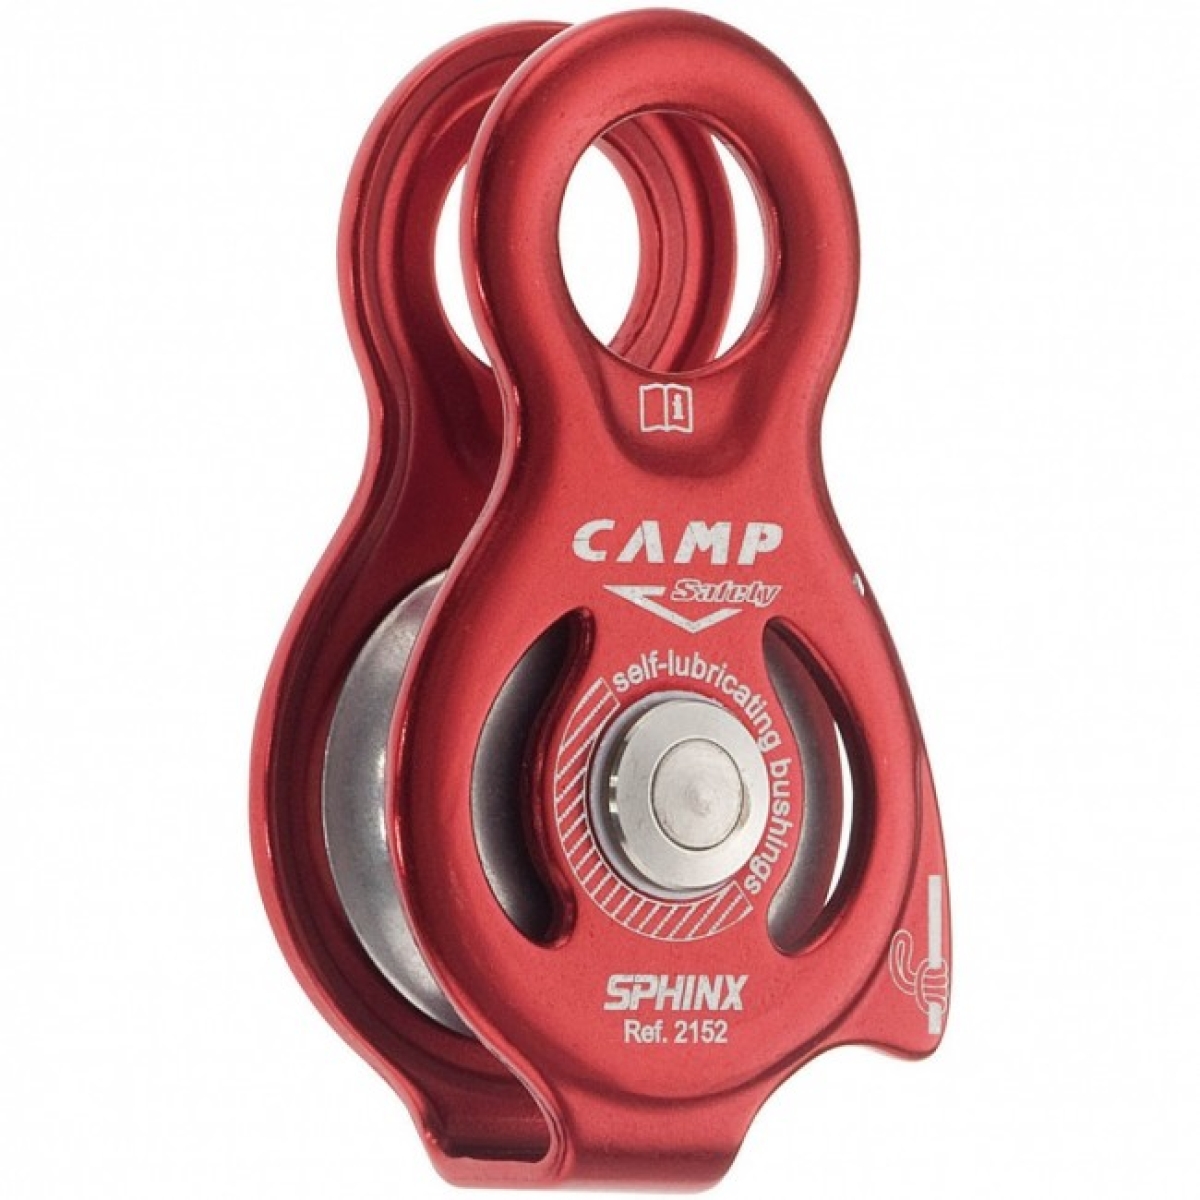 Camp Sphinx Single Pulley 2152